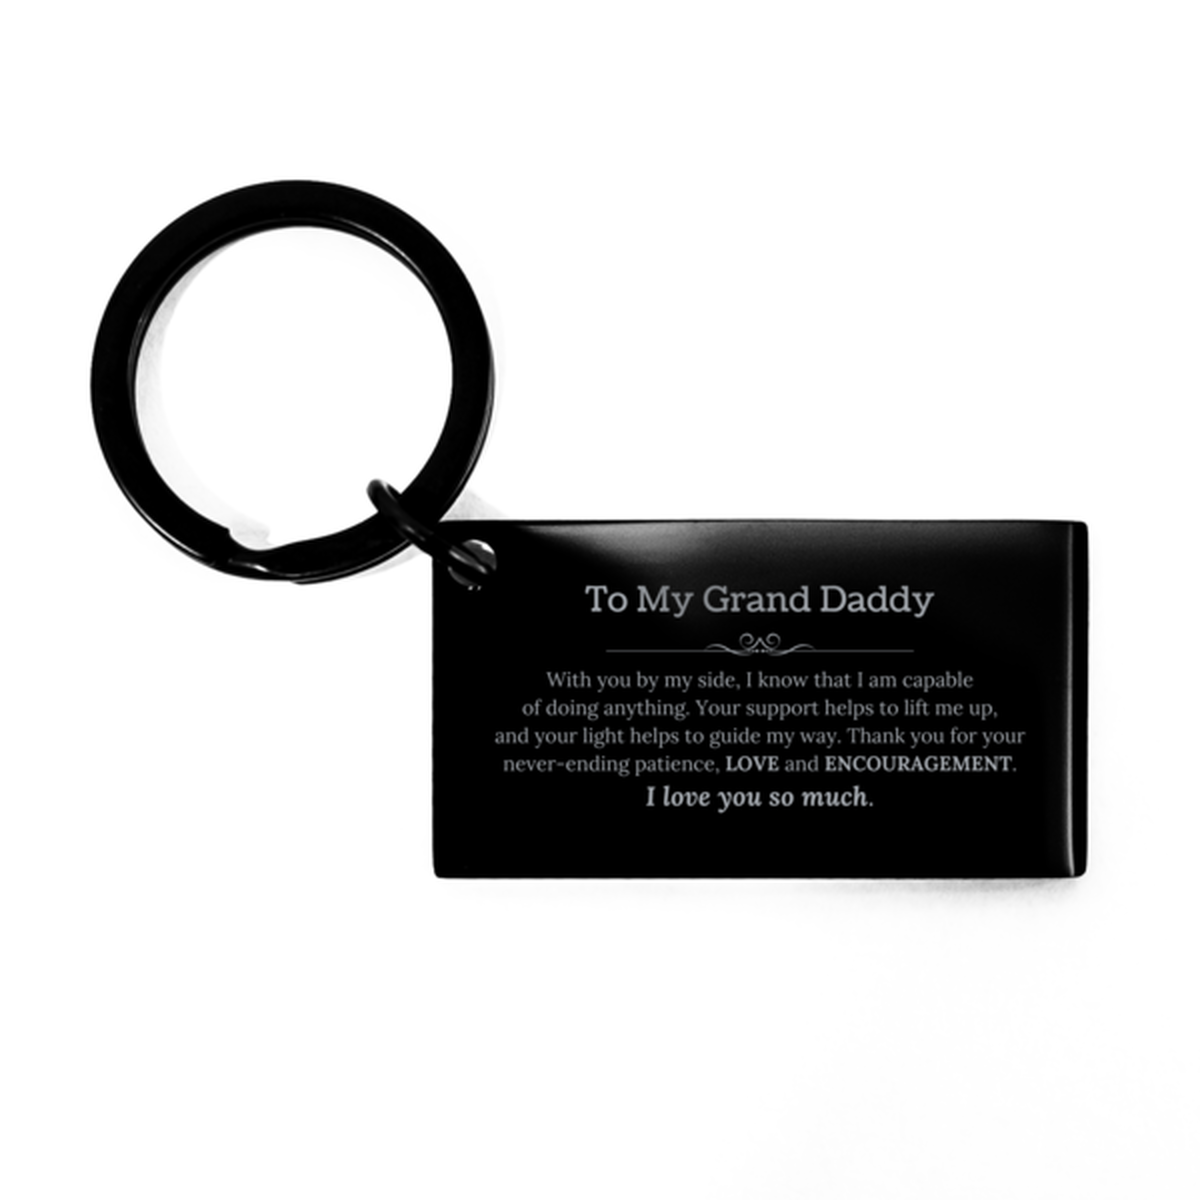 Appreciation Grand Daddy Keychain Gifts, To My Grand Daddy Birthday Christmas Wedding Keepsake Gifts for Grand Daddy With you by my side, I know that I am capable of doing anything. I love you so much